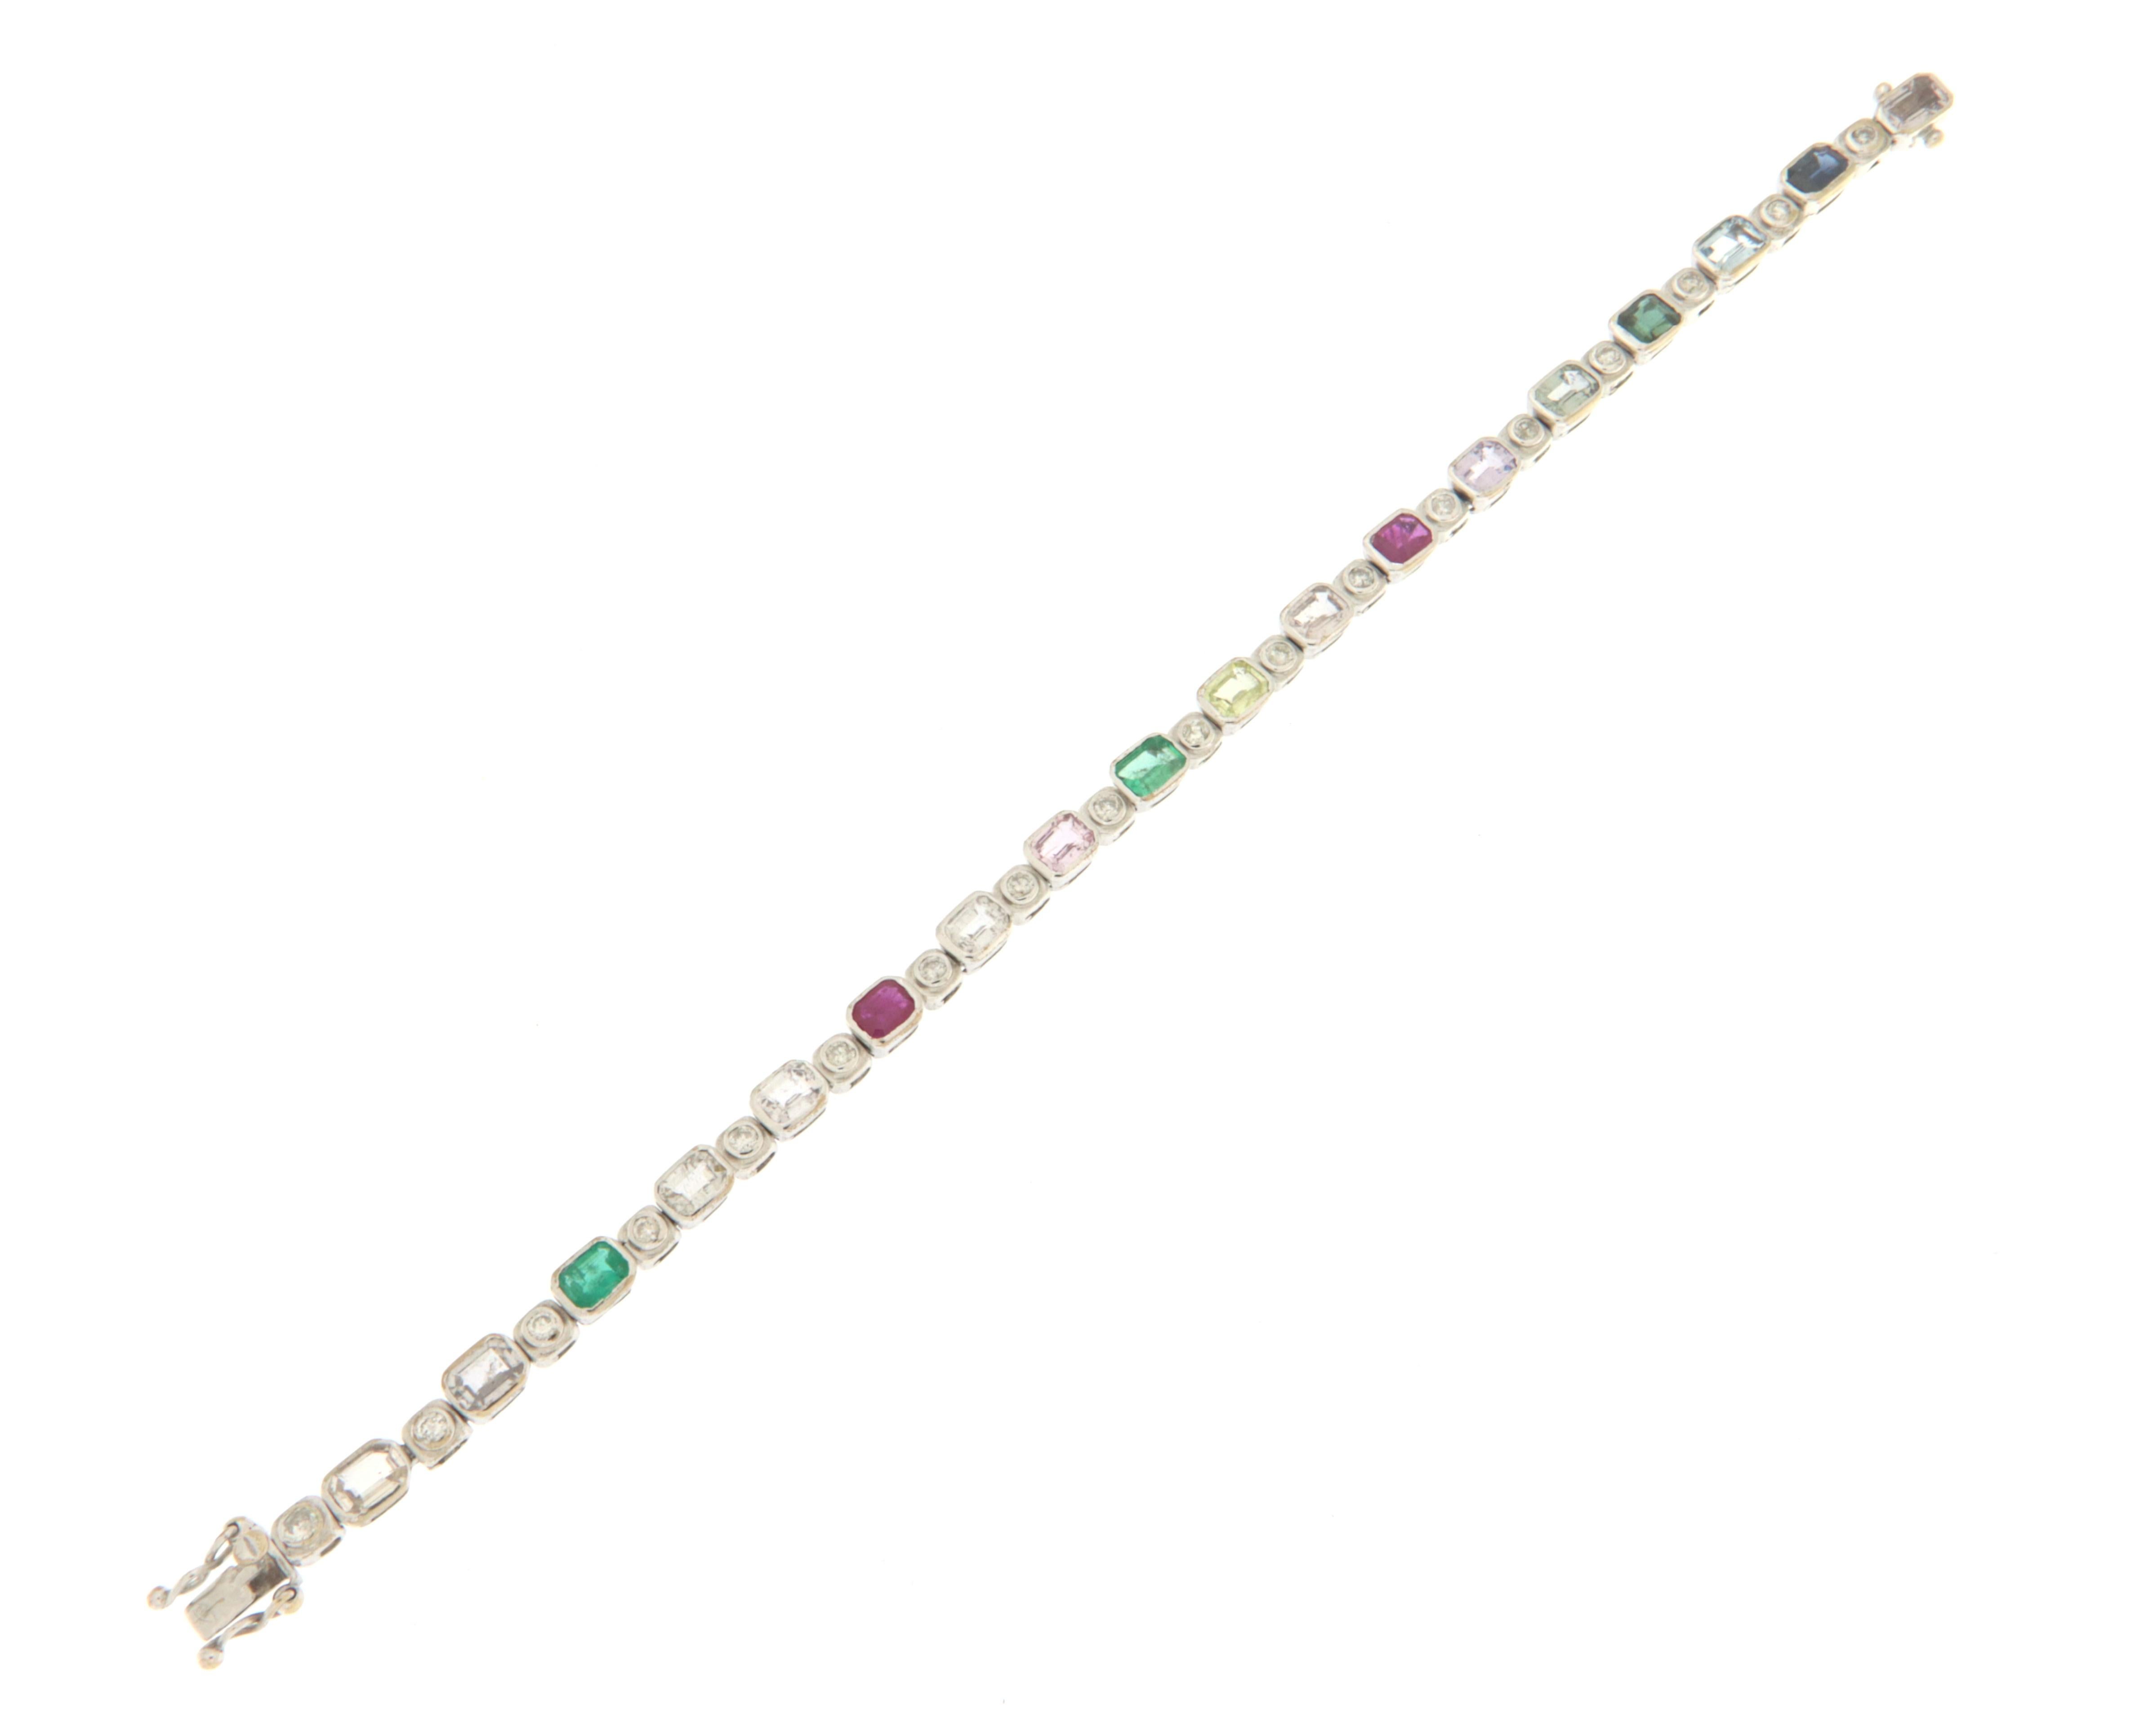 Diamonds Emeralds Rubies Sapphires White Gold 18 Karat Tennis Bracelet In New Condition For Sale In Marcianise, IT